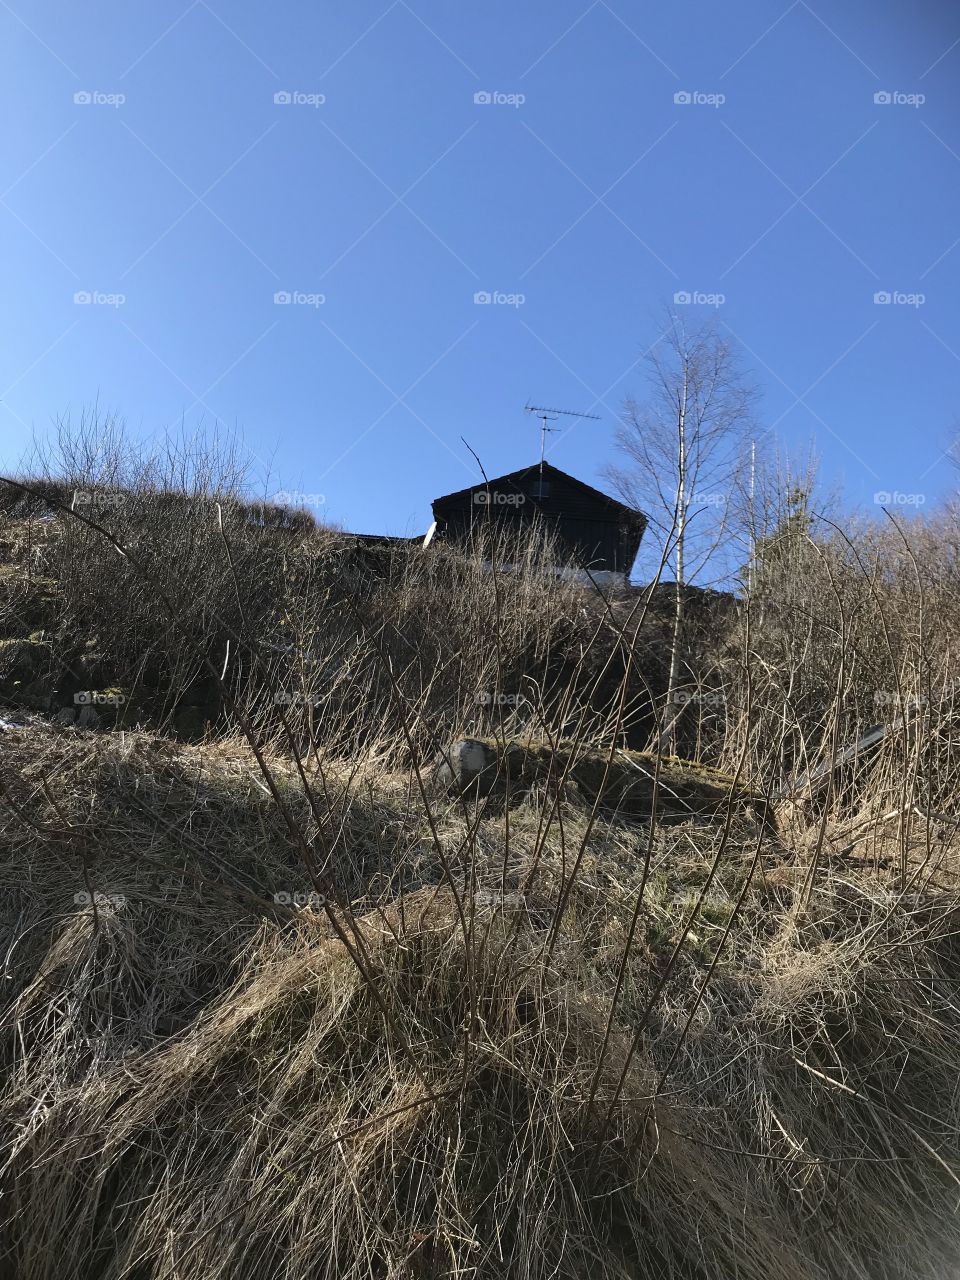 A house is peaking up at the top of the hill. The skies are totally blue, and the sun is shining. The ground is still frozen after the winter.